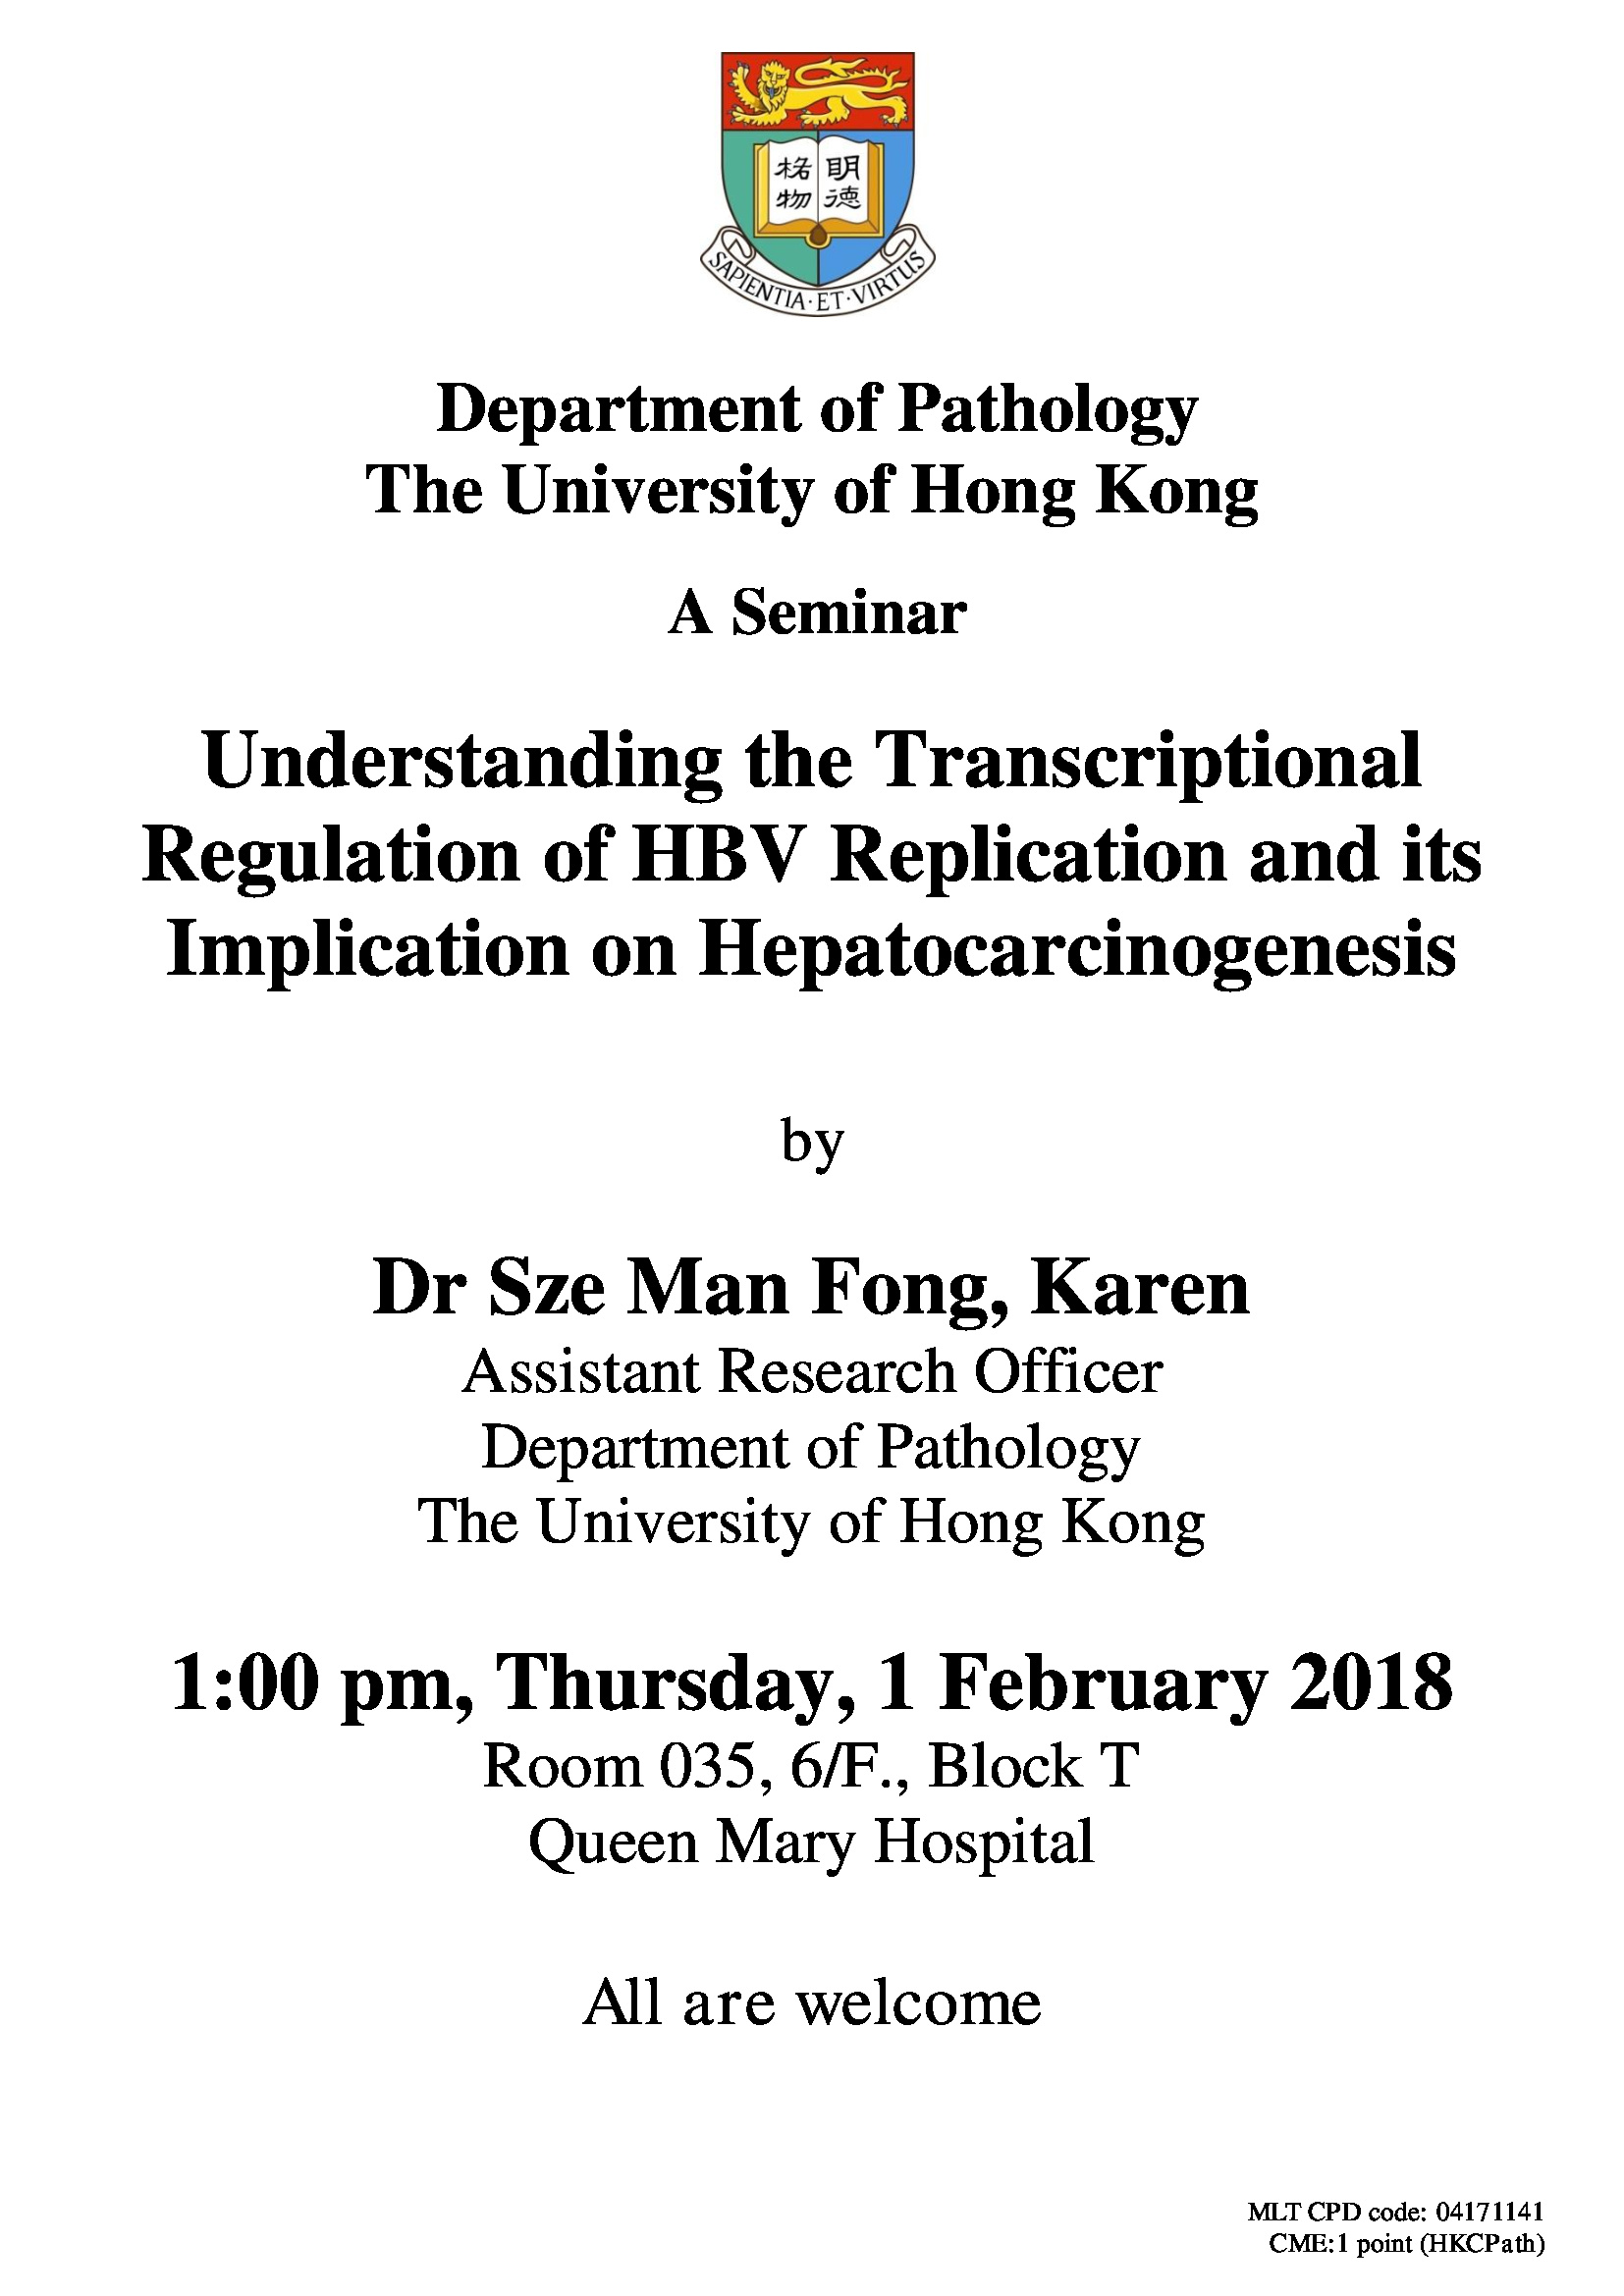 A Seminar on Understanding the Transcriptional Regulation of HBV Replication and its Implication  by  Dr Karen Sze on 1 Feb (1 pm)